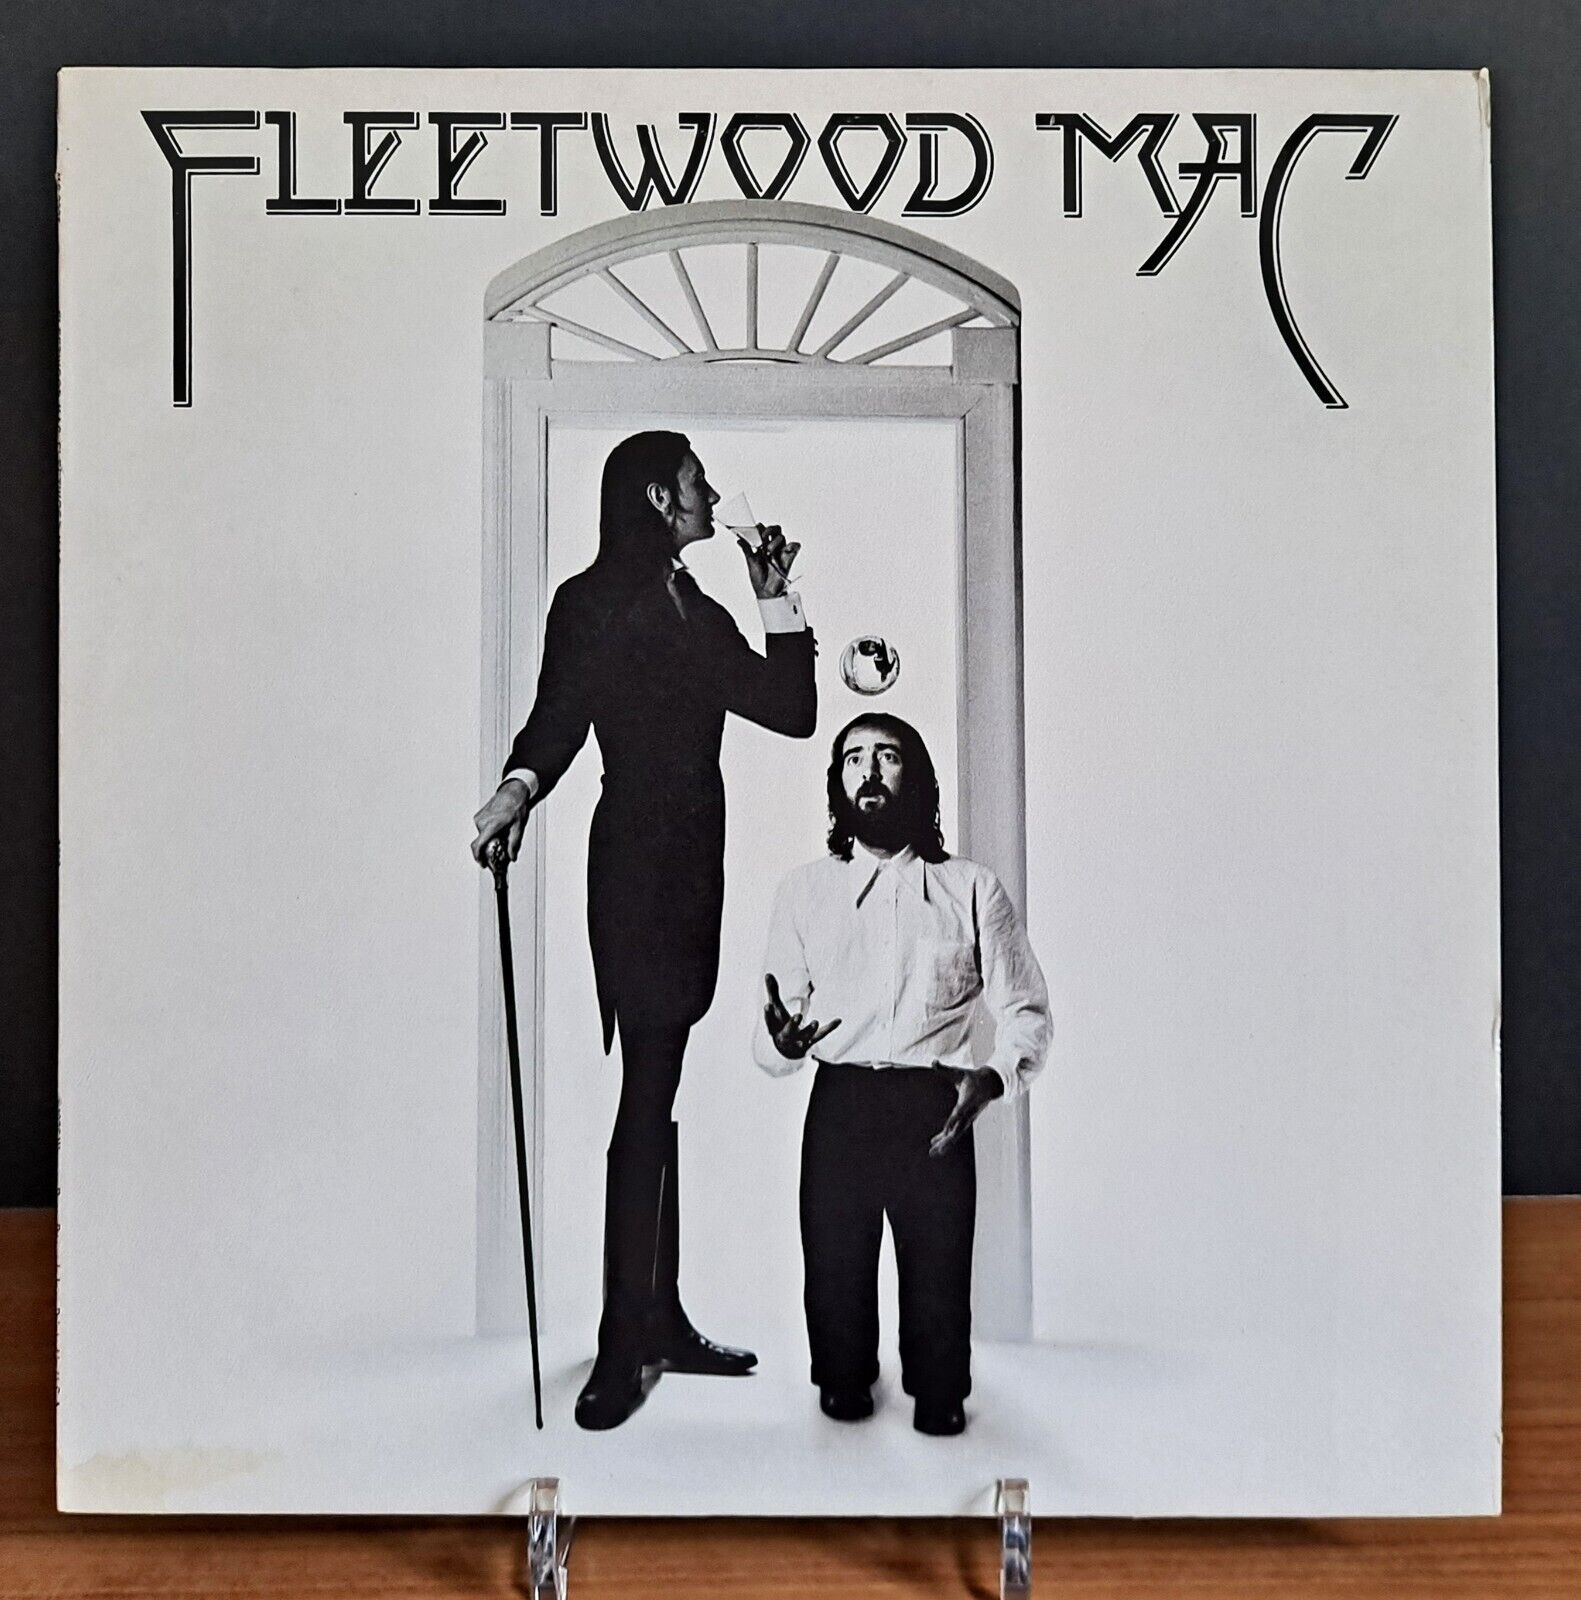 FLEETWOOD MAC-SELF TITLED-1975-REPRISE MS 2225-STEREO-TEXTURED COVER-VG+ VINYL